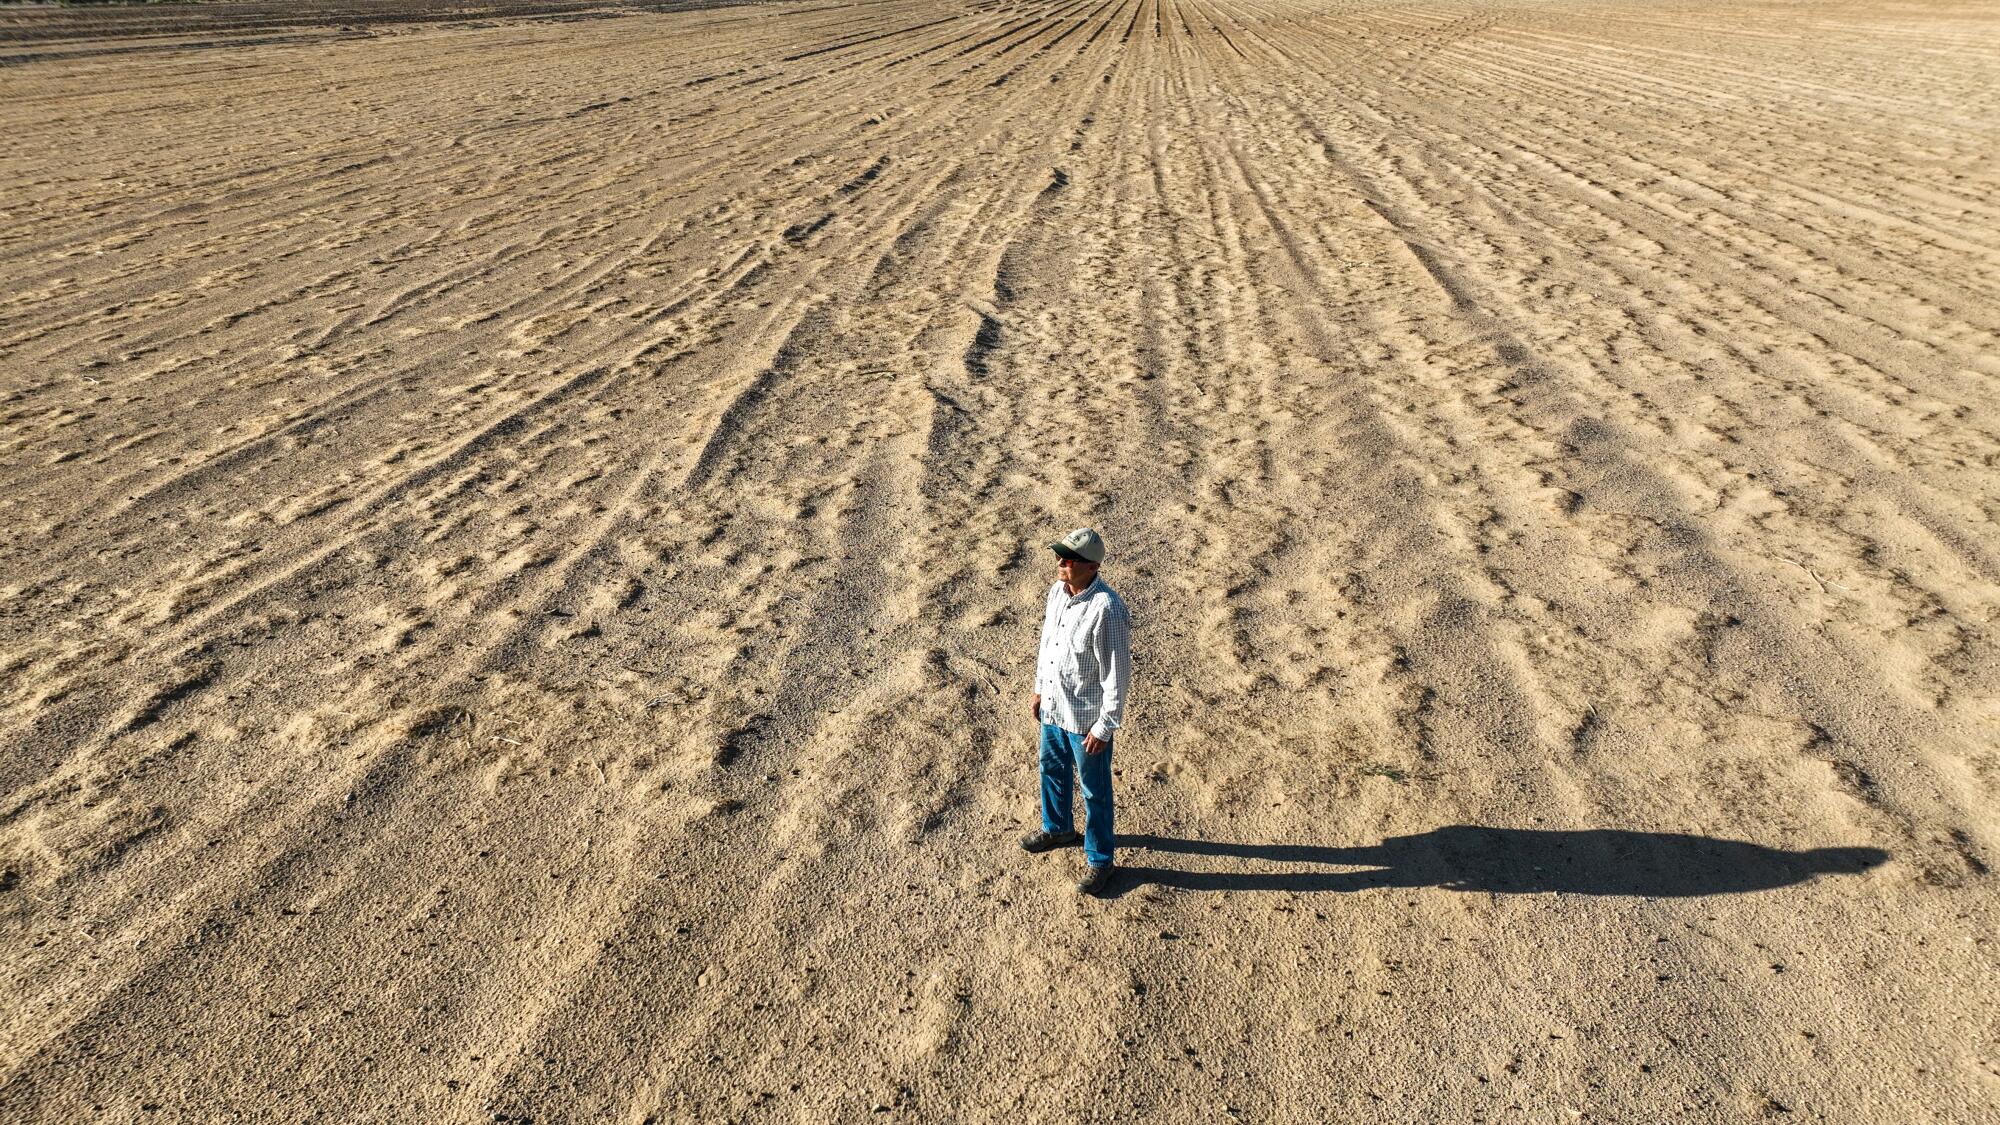 Ralph Strahm stares out at a barren former carrot farm that will become a solar project.